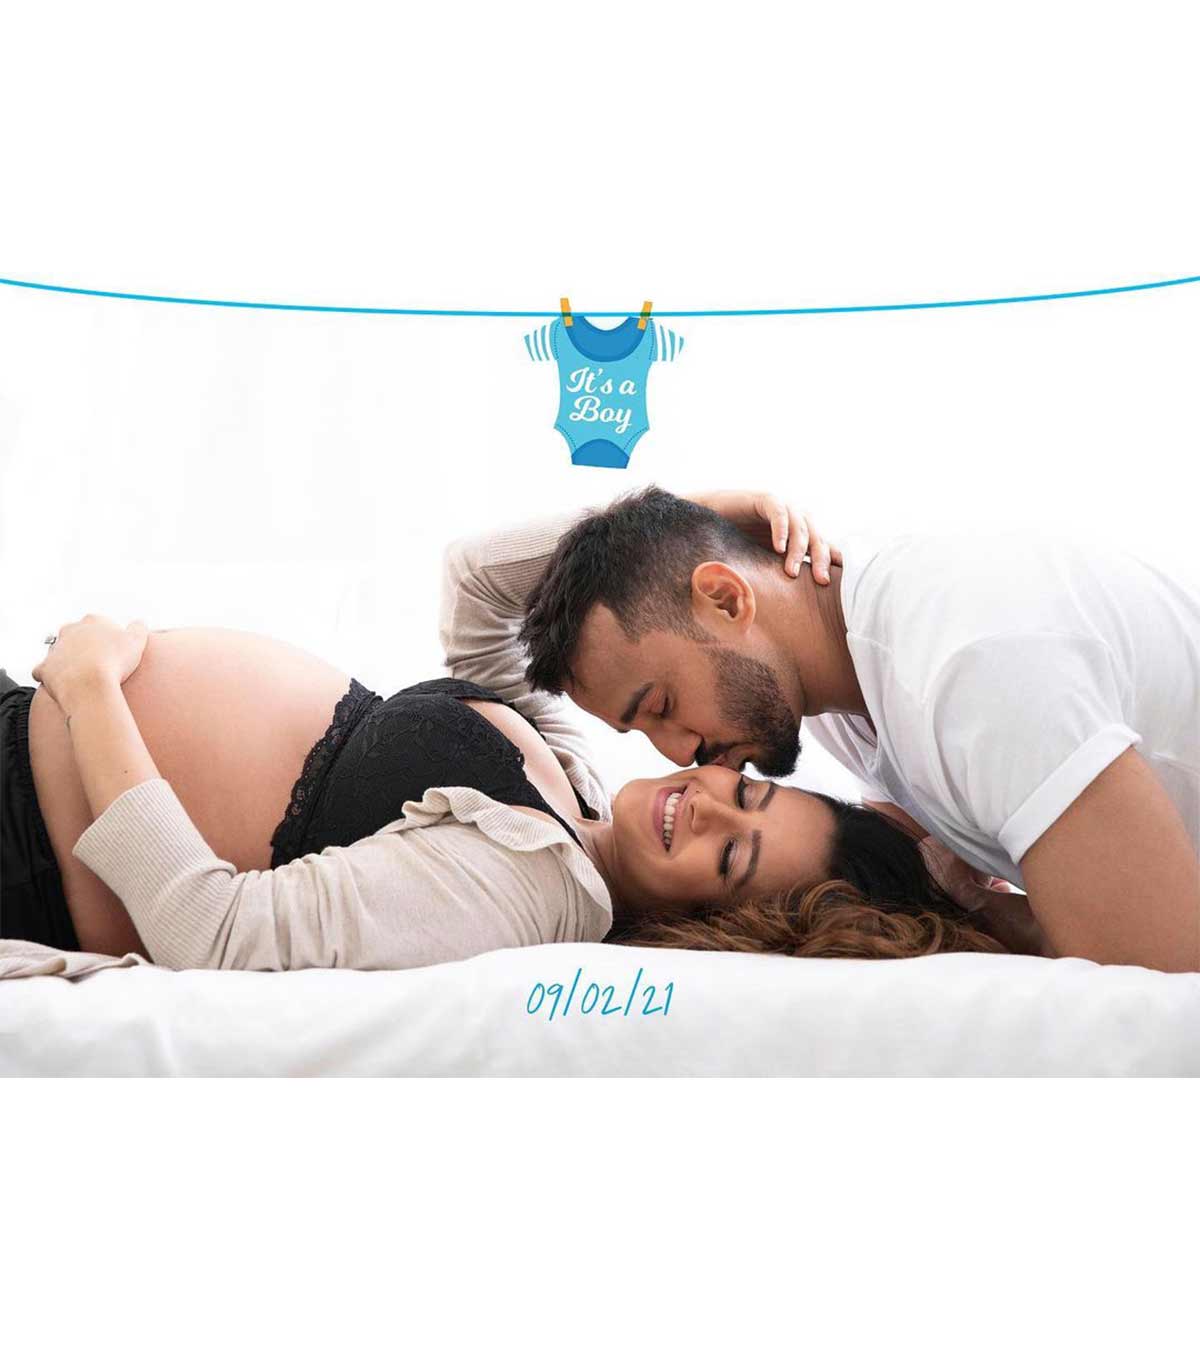 It’s A Boy! Anita Hassanandani And Rohit Reddy Welcome Their First Child